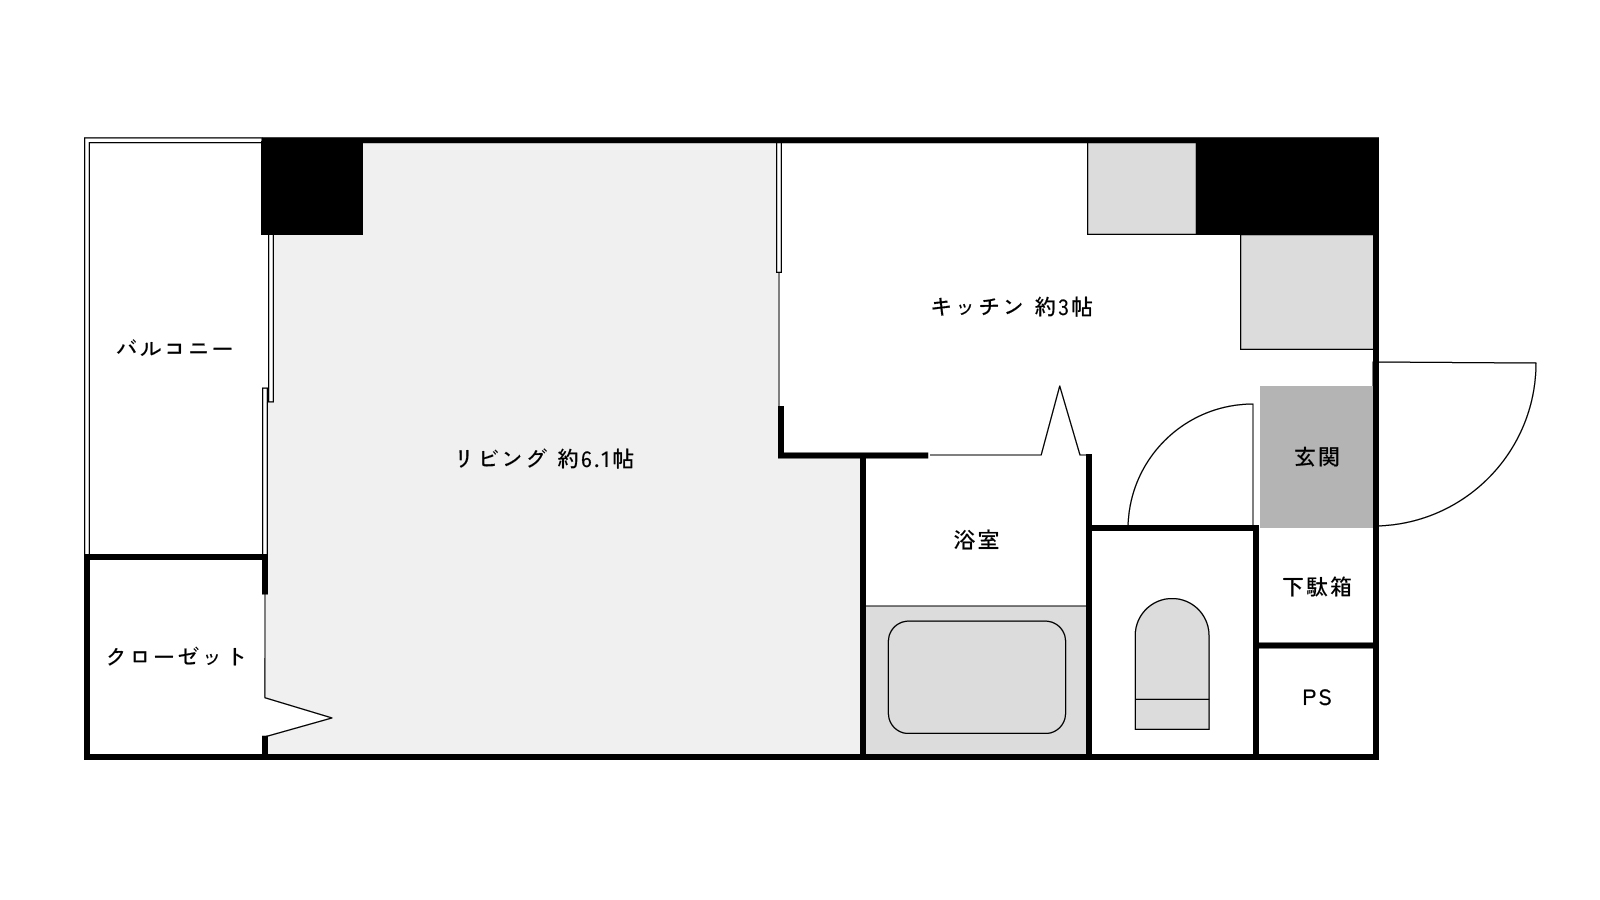 Mille Court 101の間取り図